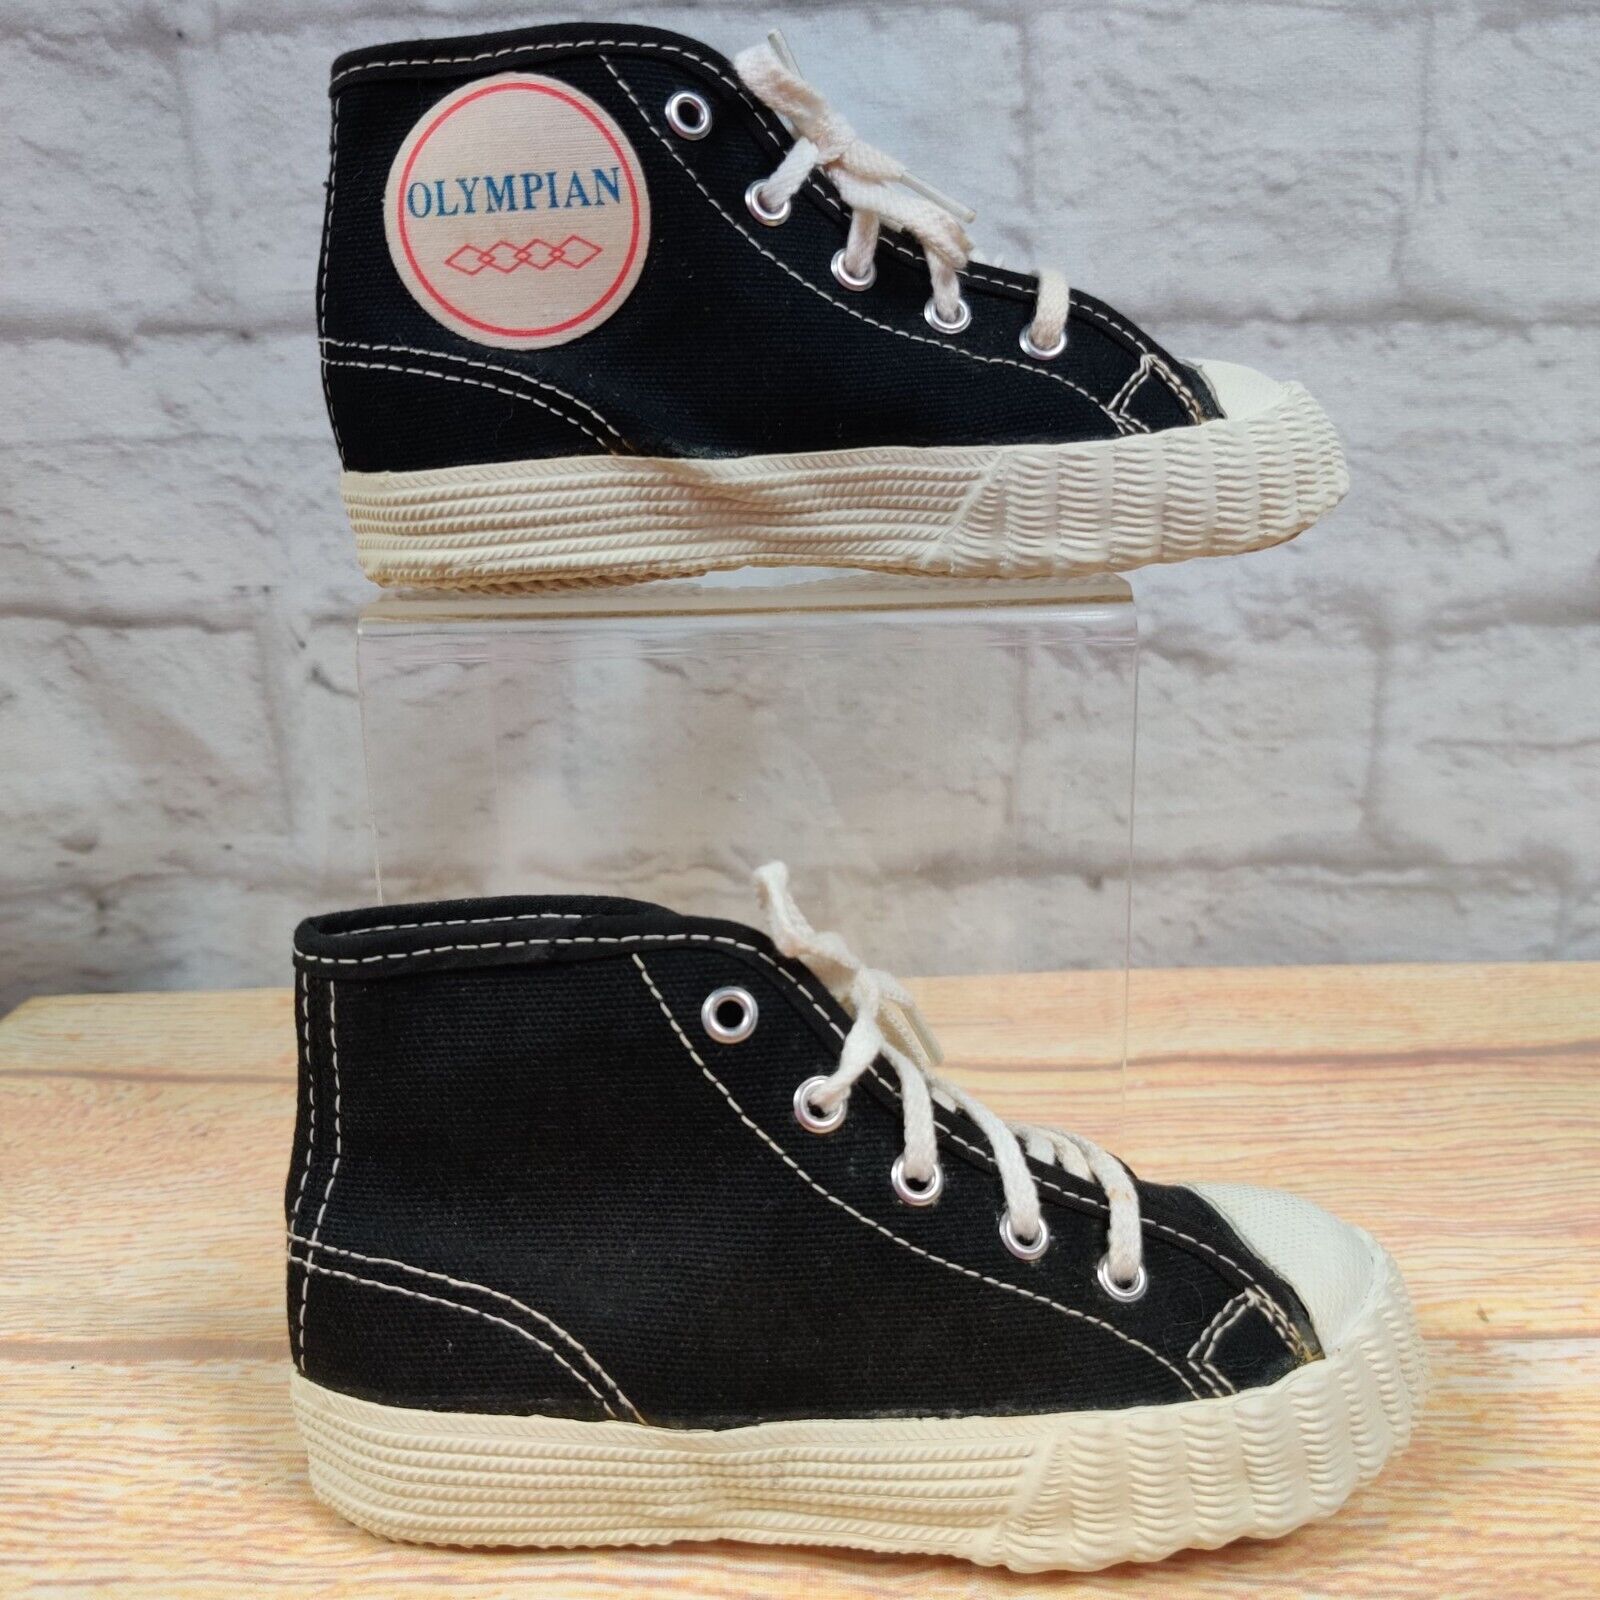 Vintage Olympian high top canvas sneaker basketball shoes black toddlers sz  7 | eBay